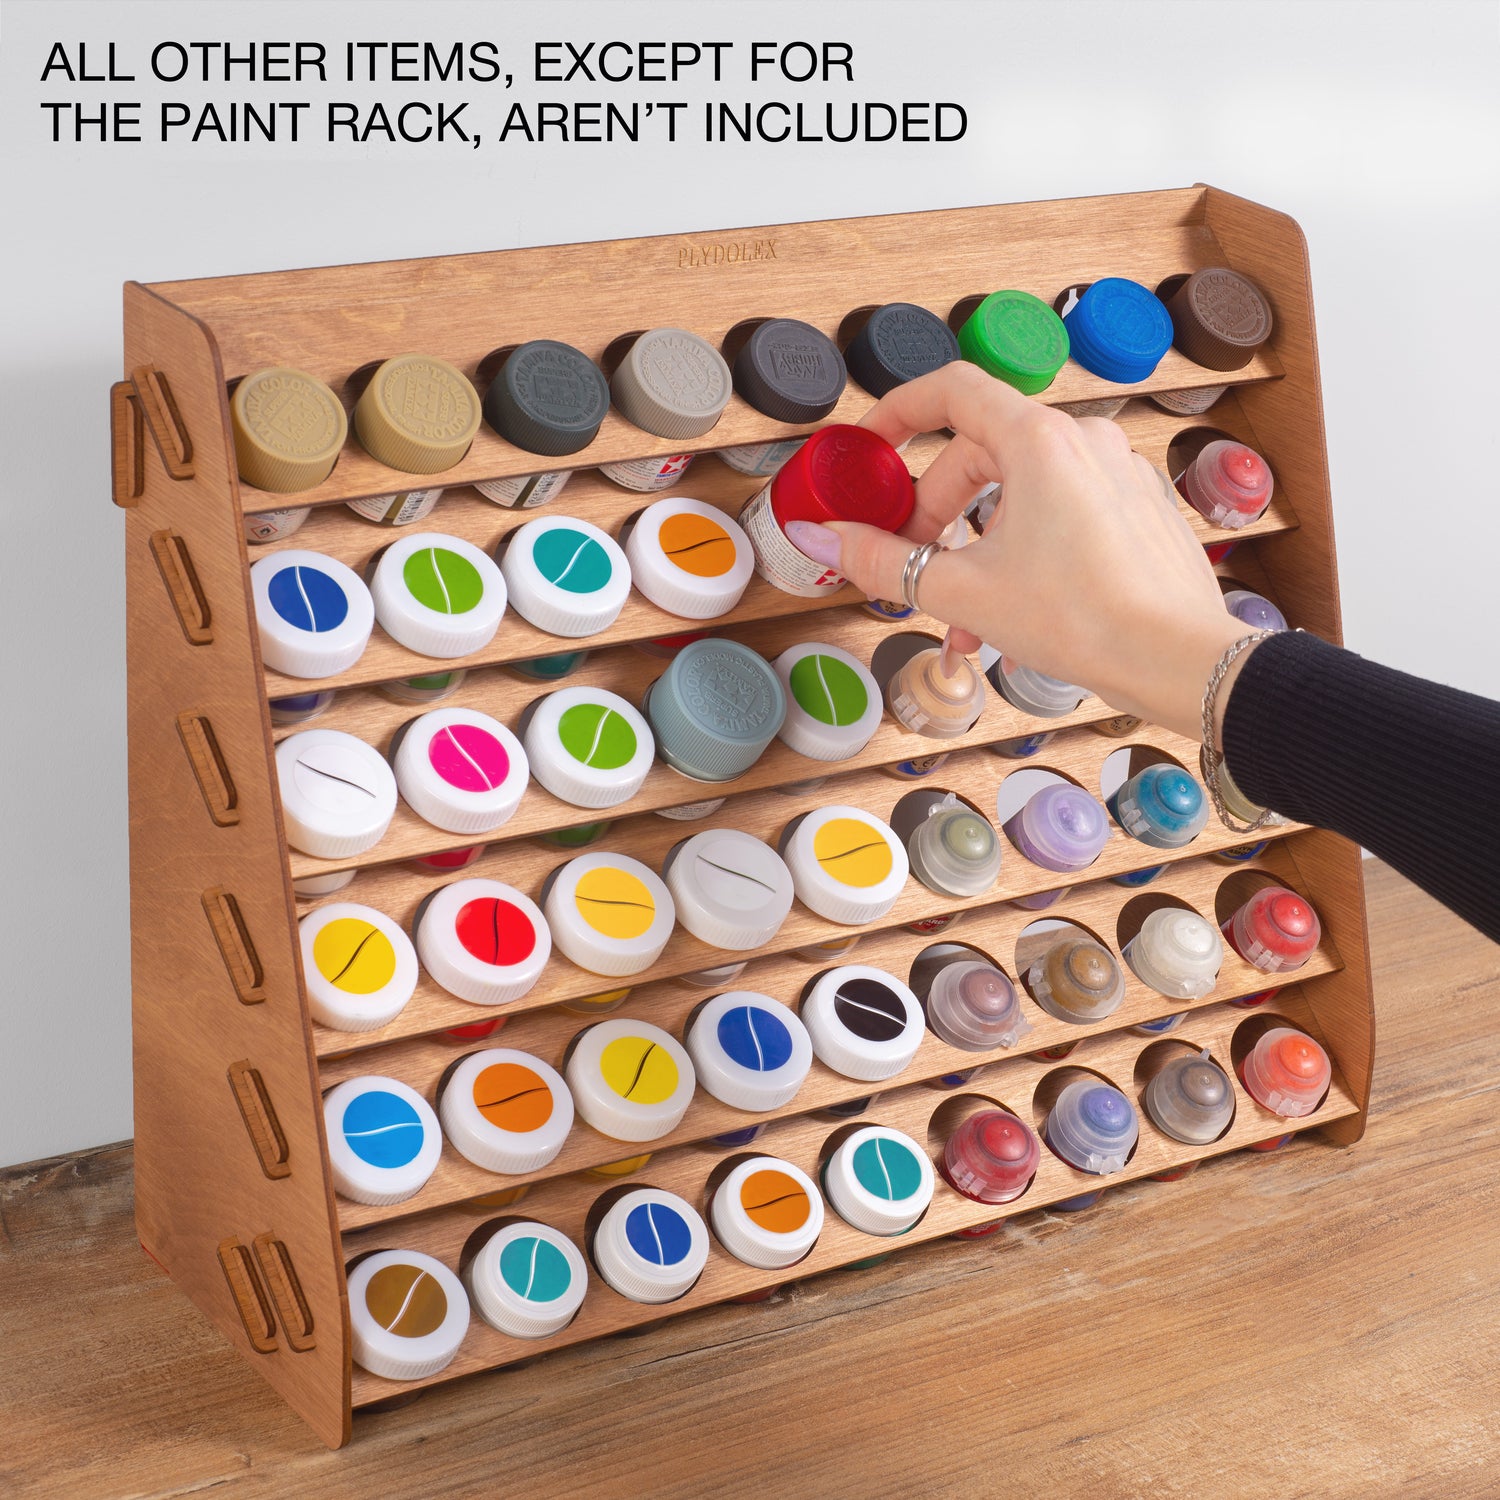 Plydolex Paint Rack Organizer with 65 Holes of 2 Sizes for Miniature Paint  Set - Wall-mounted Wooden Craft Paint Storage Rack - Craft Paint Holder